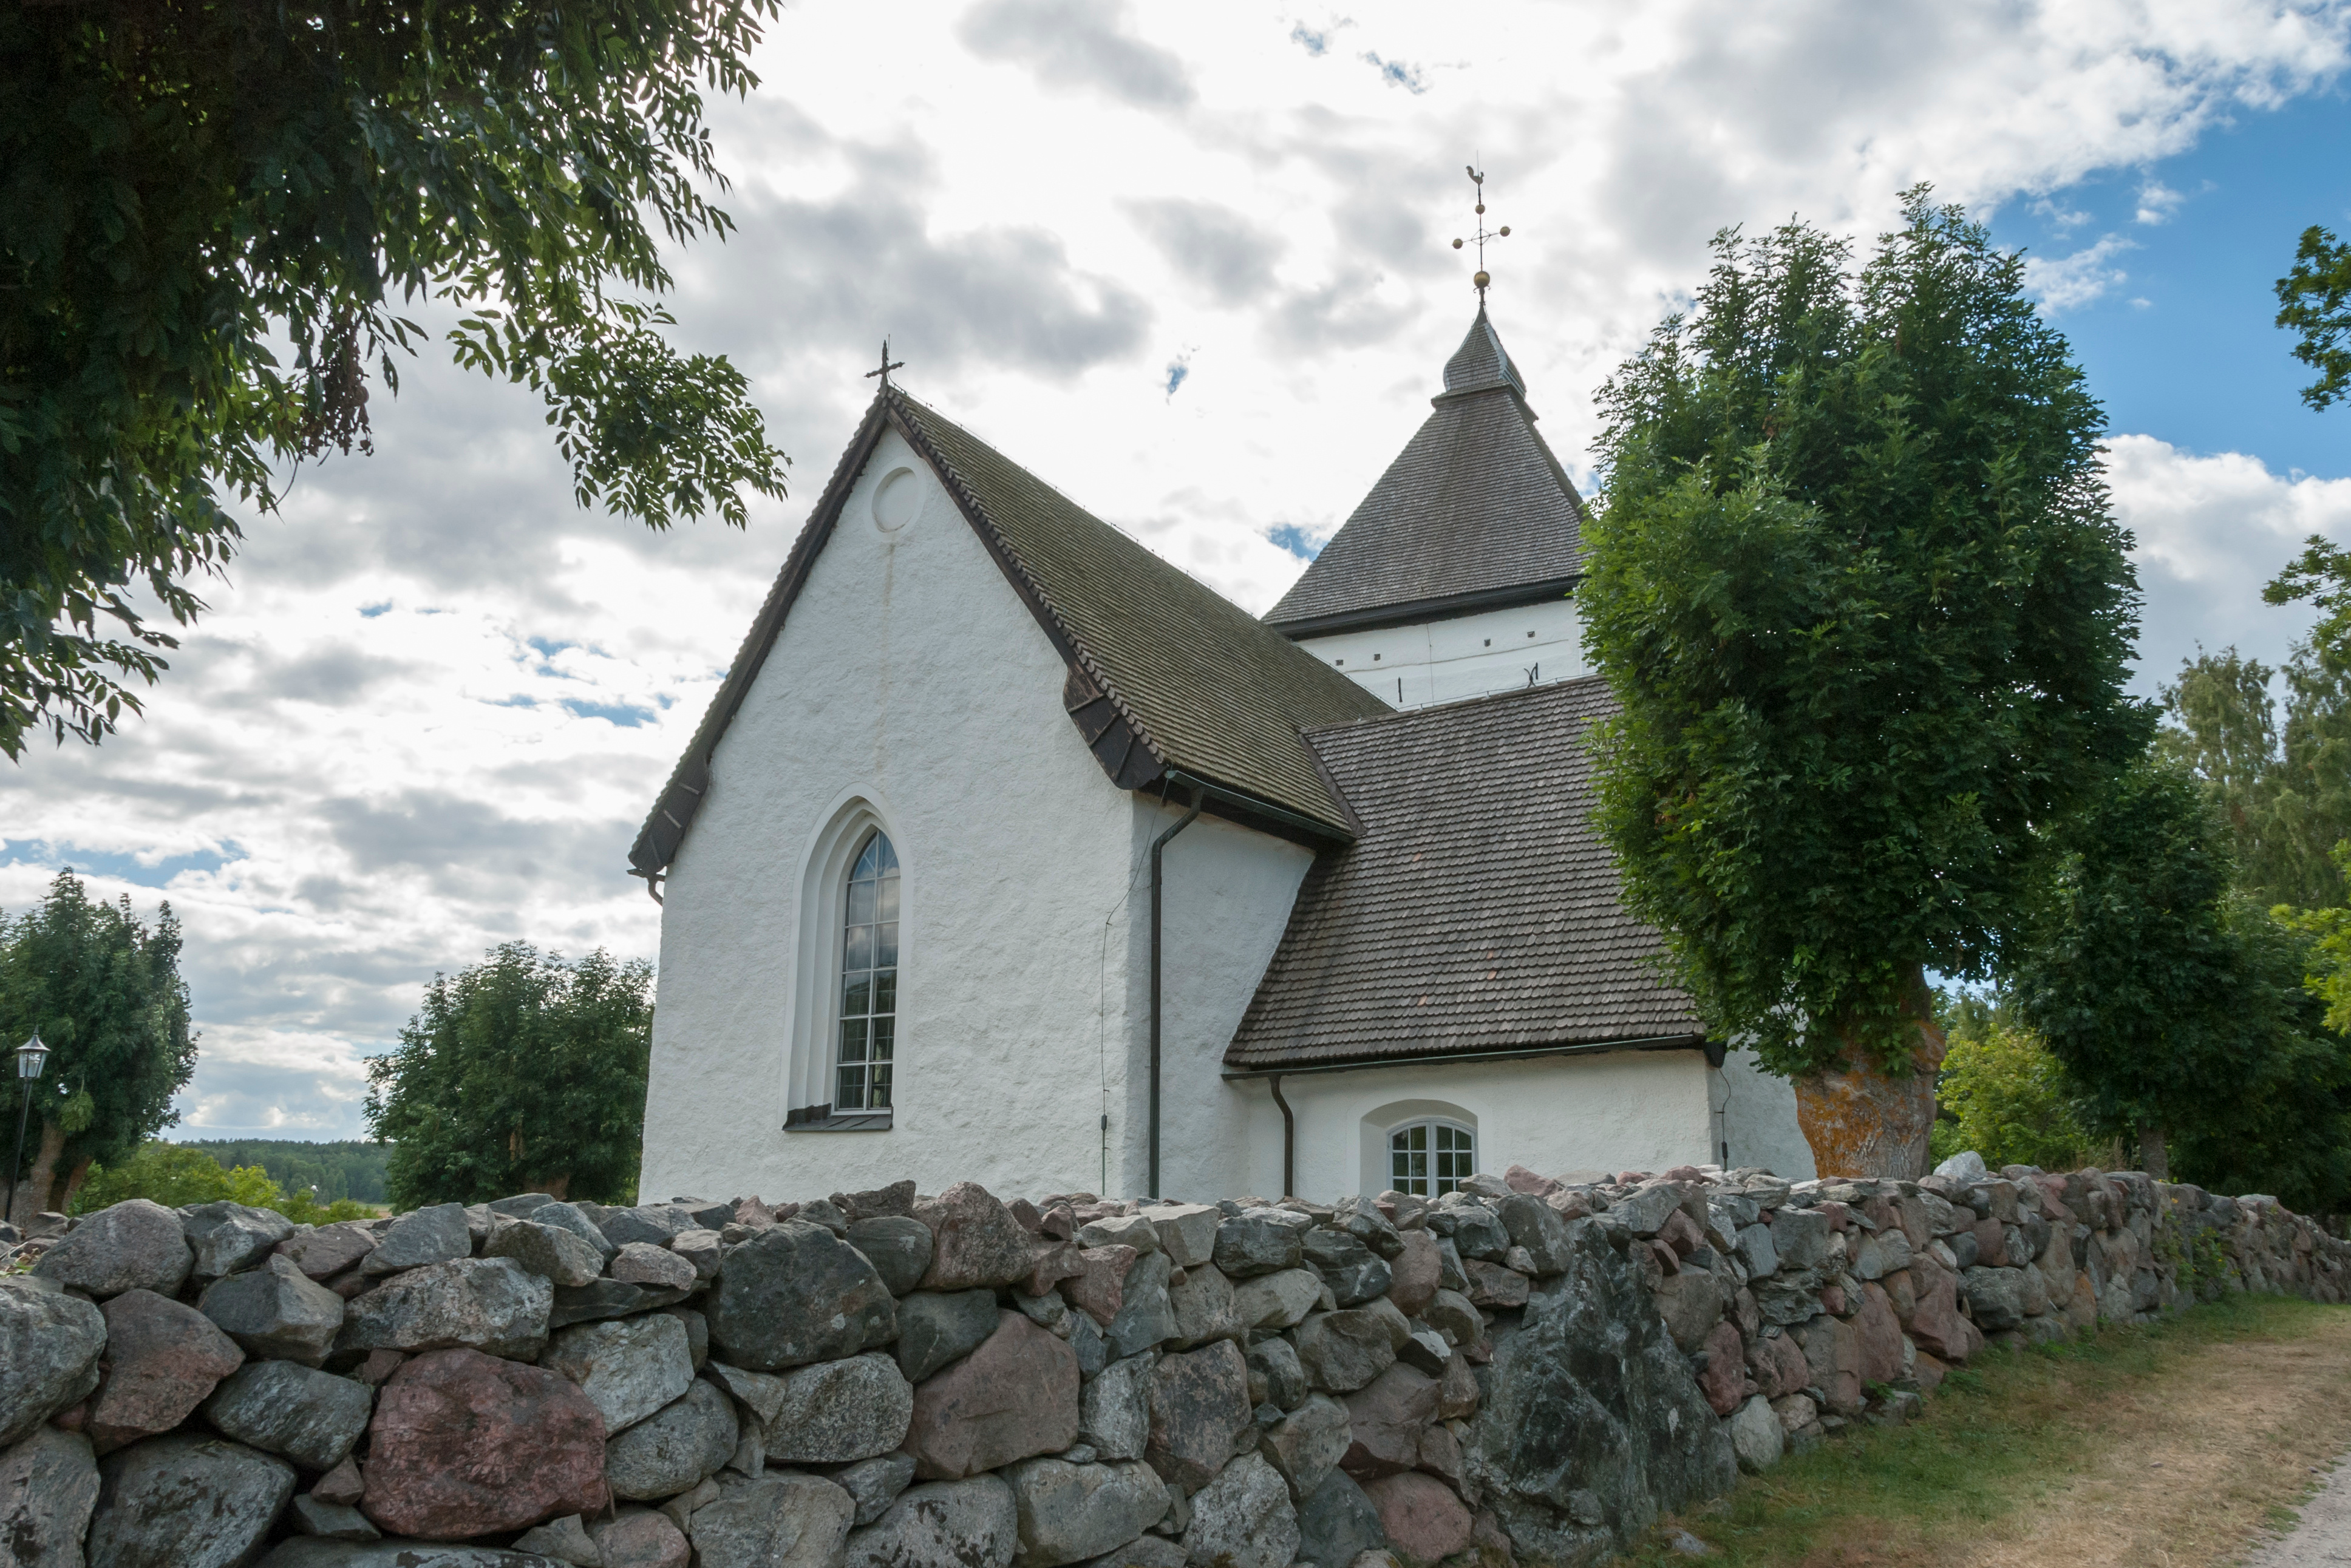  Old church in Hovgarden Sweden with rock wall in front.